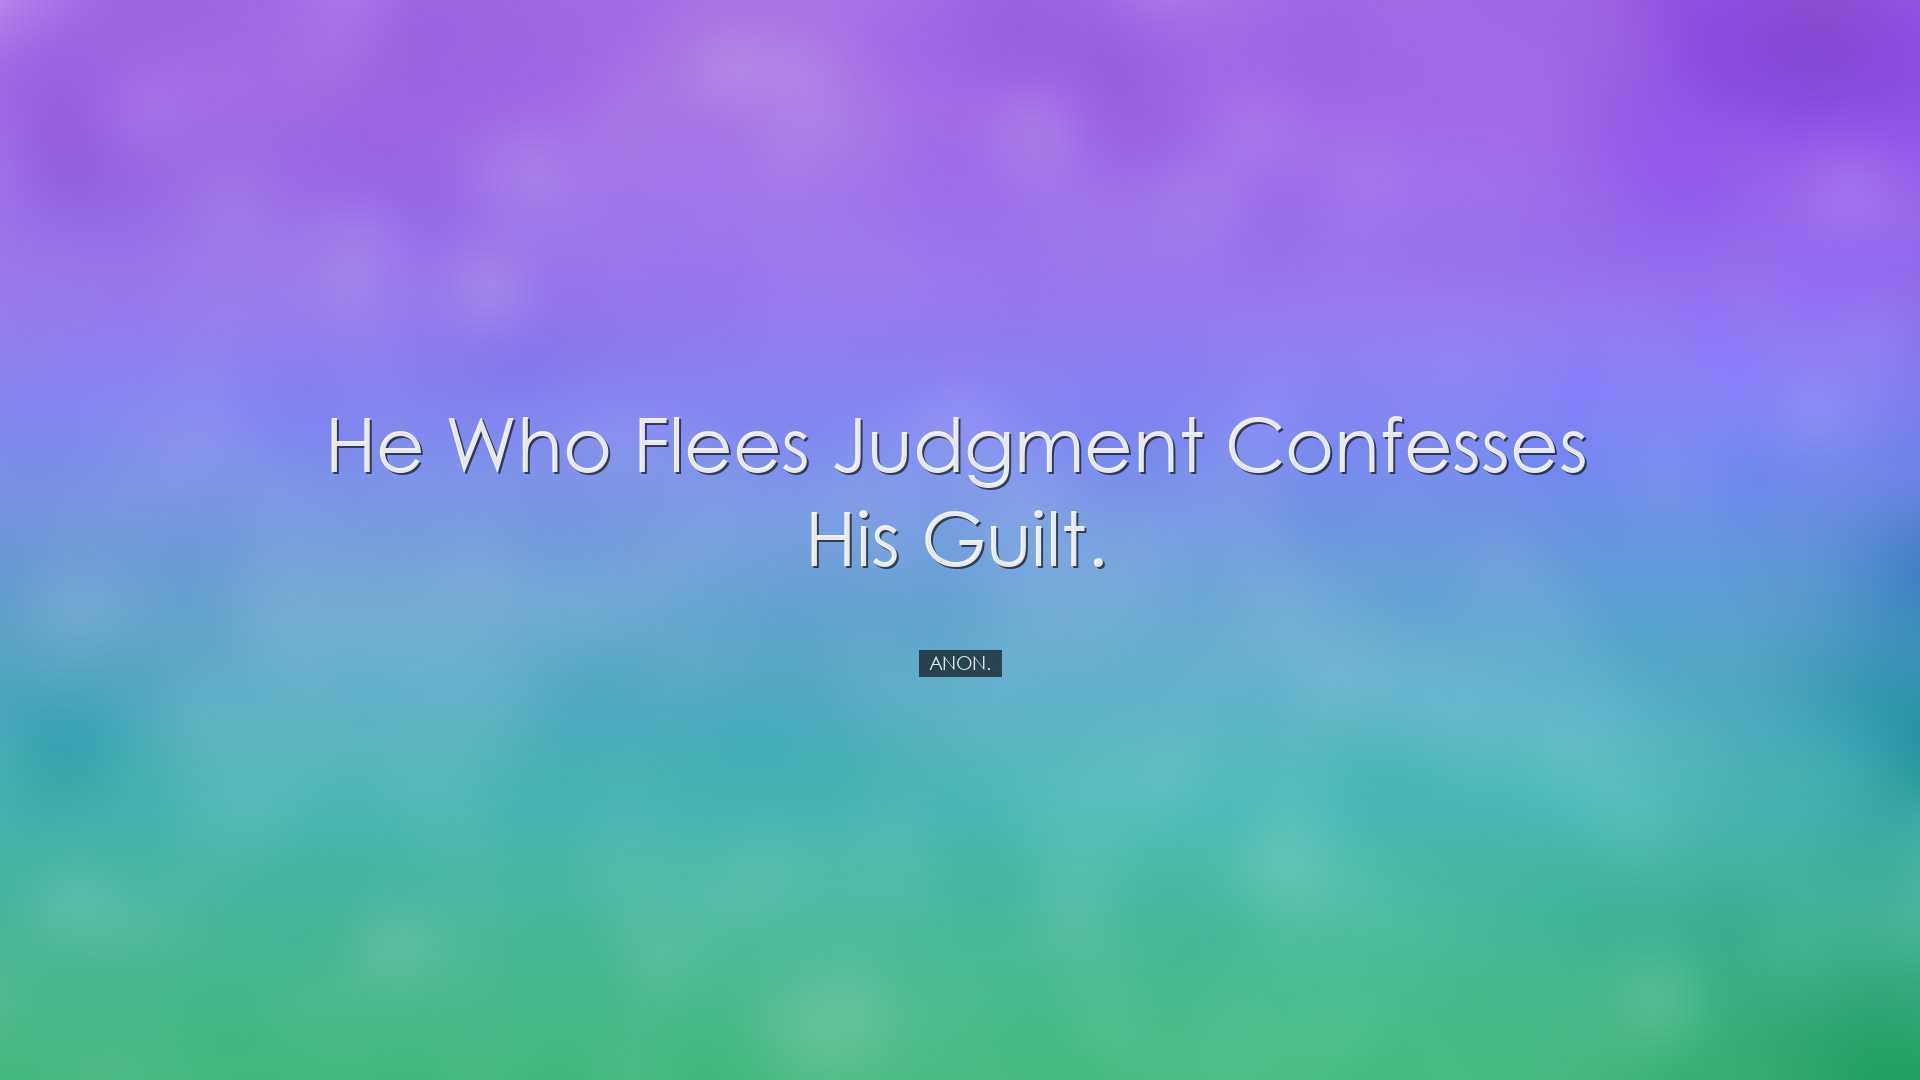 He who flees judgment confesses his guilt. - Anon.